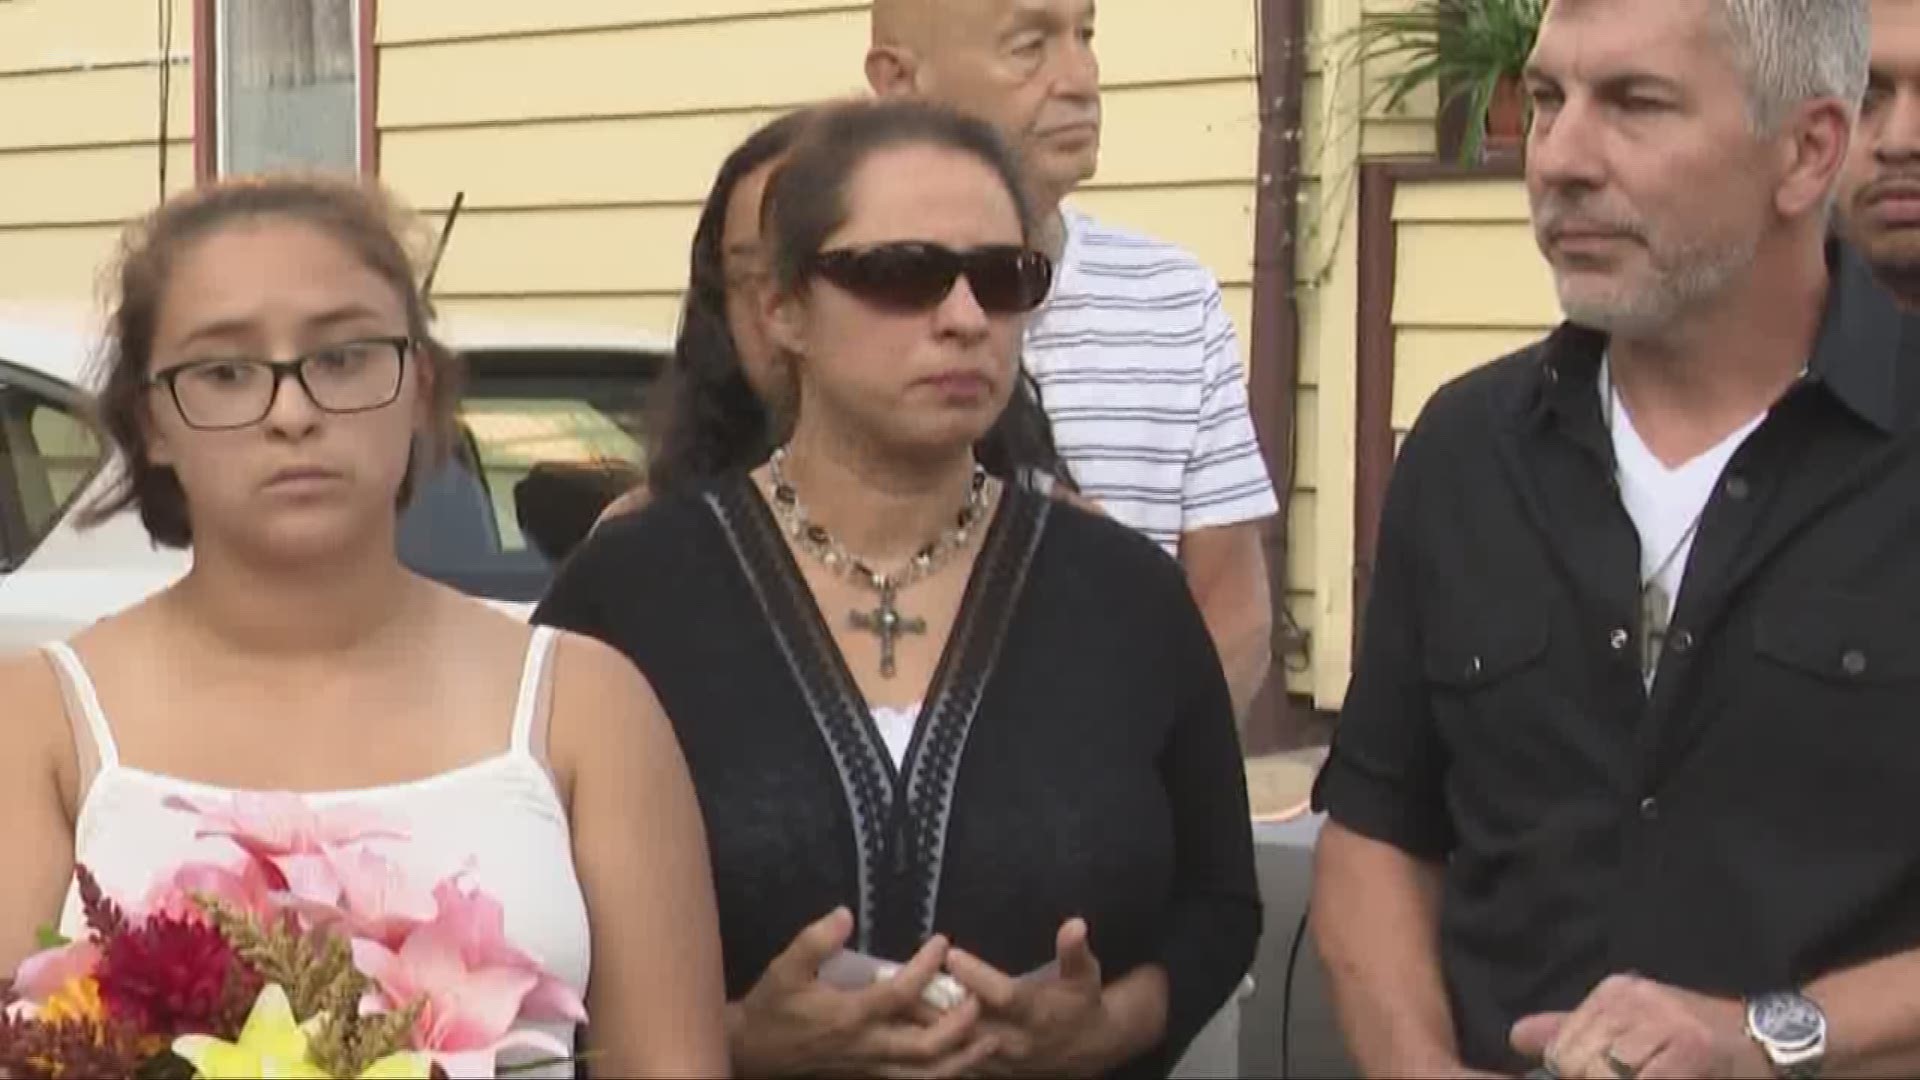 Vigil held for 94-year-old woman killed in Slavic Village home invasion